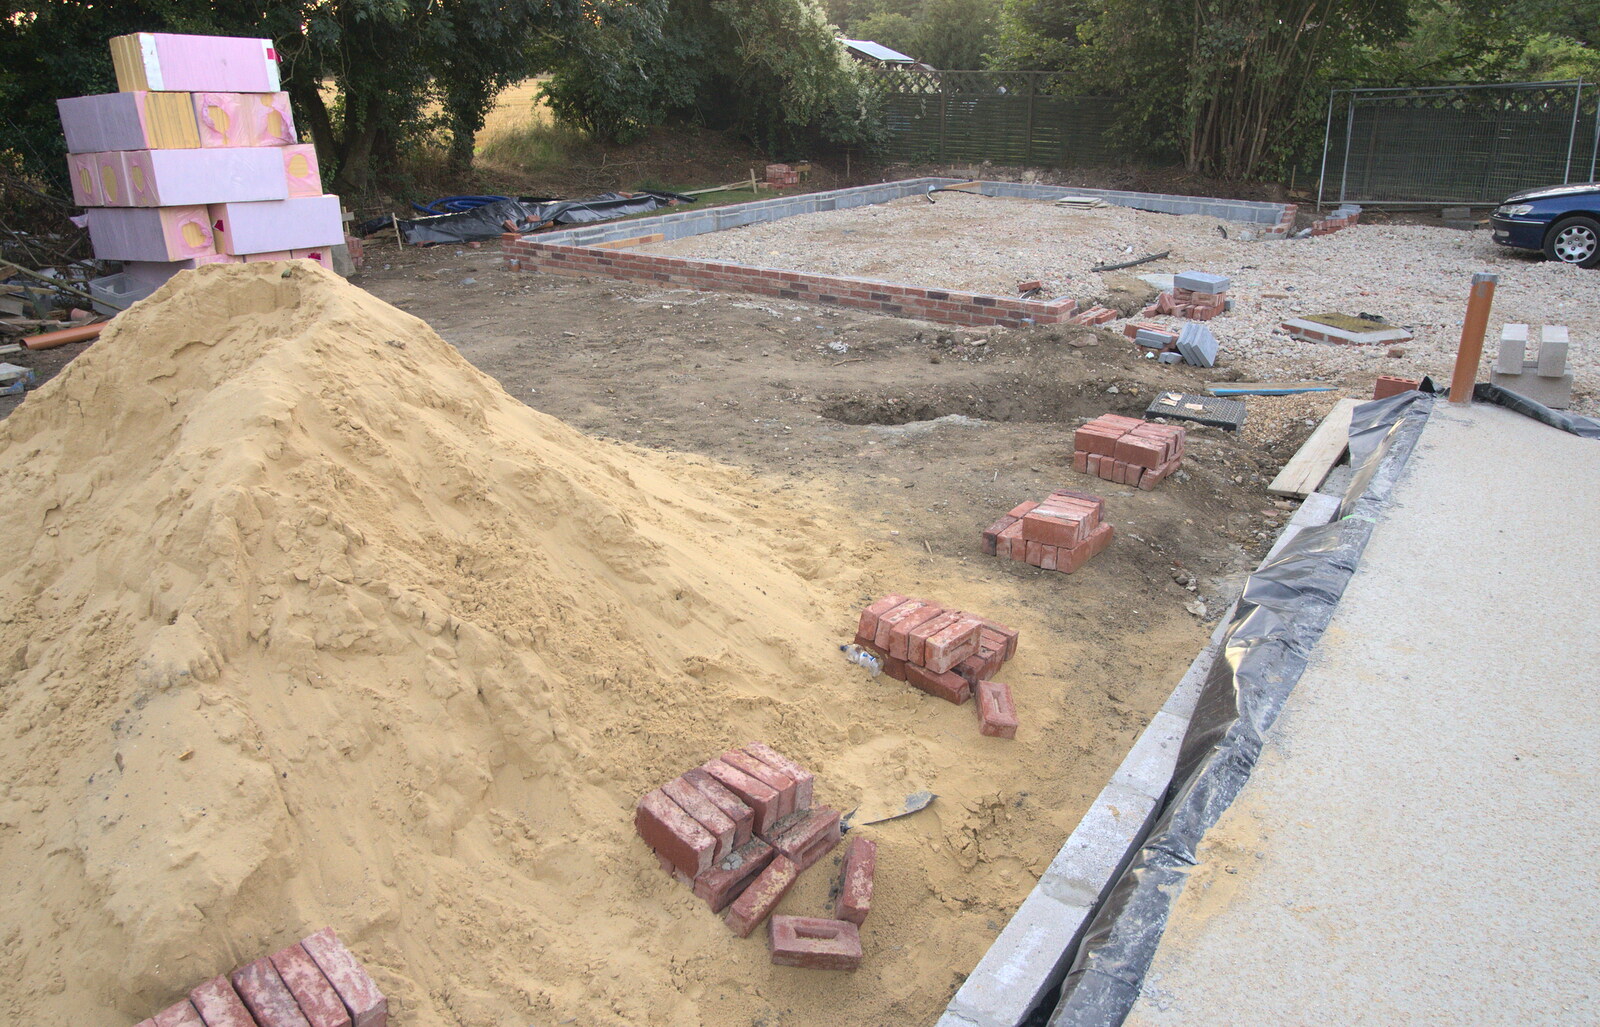 Bricks appear near the pile of sand from Bressingham Gardens, and Building Progress, Brome, Suffolk - 26th August 2013